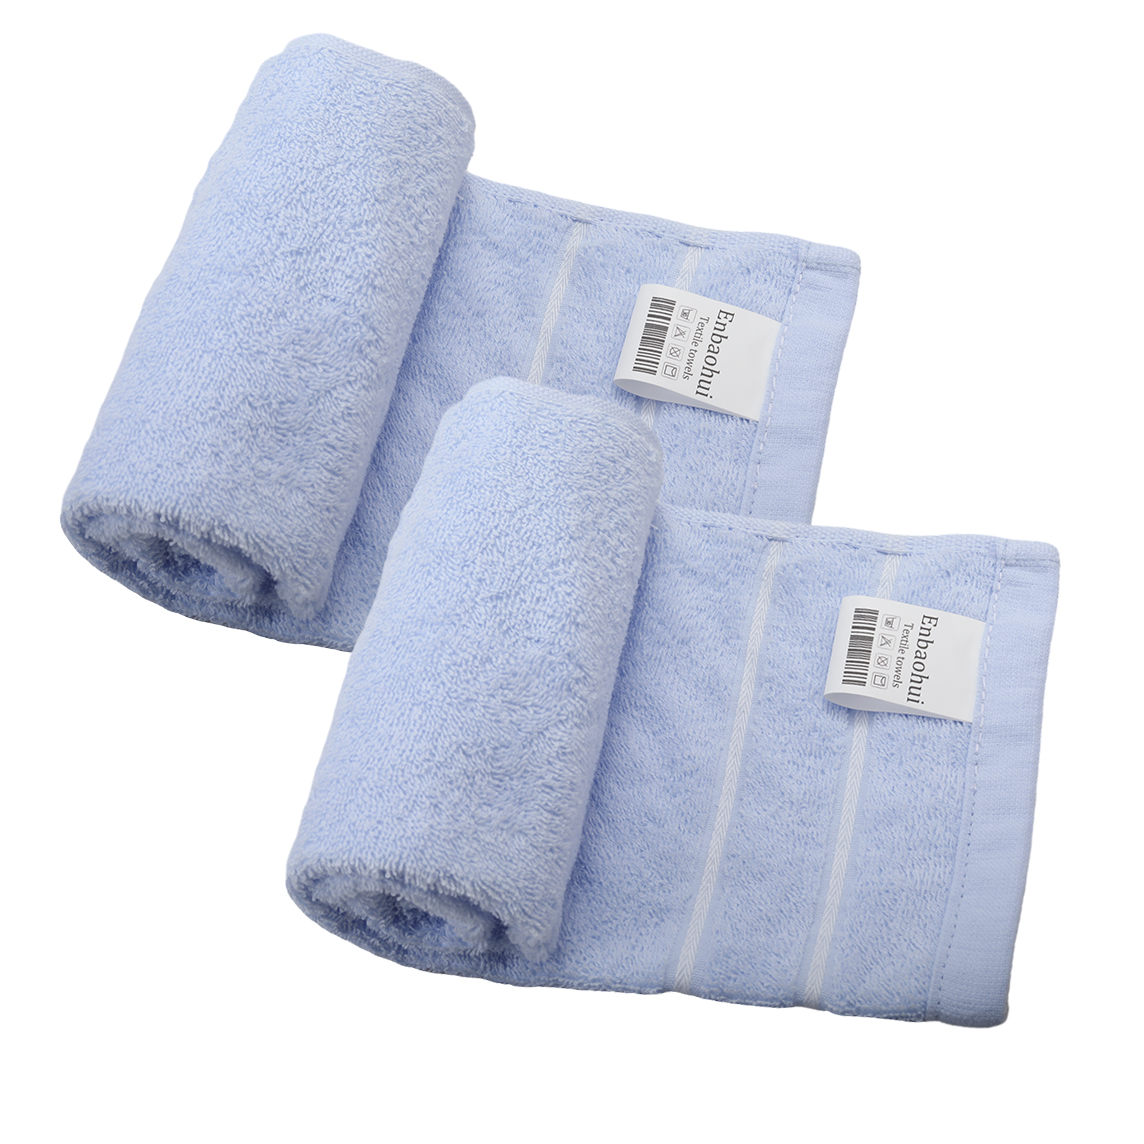 Enbaohui Textile towel, Quick-drying, soft, strong water absorption towel for men and women(15x25 Inches)